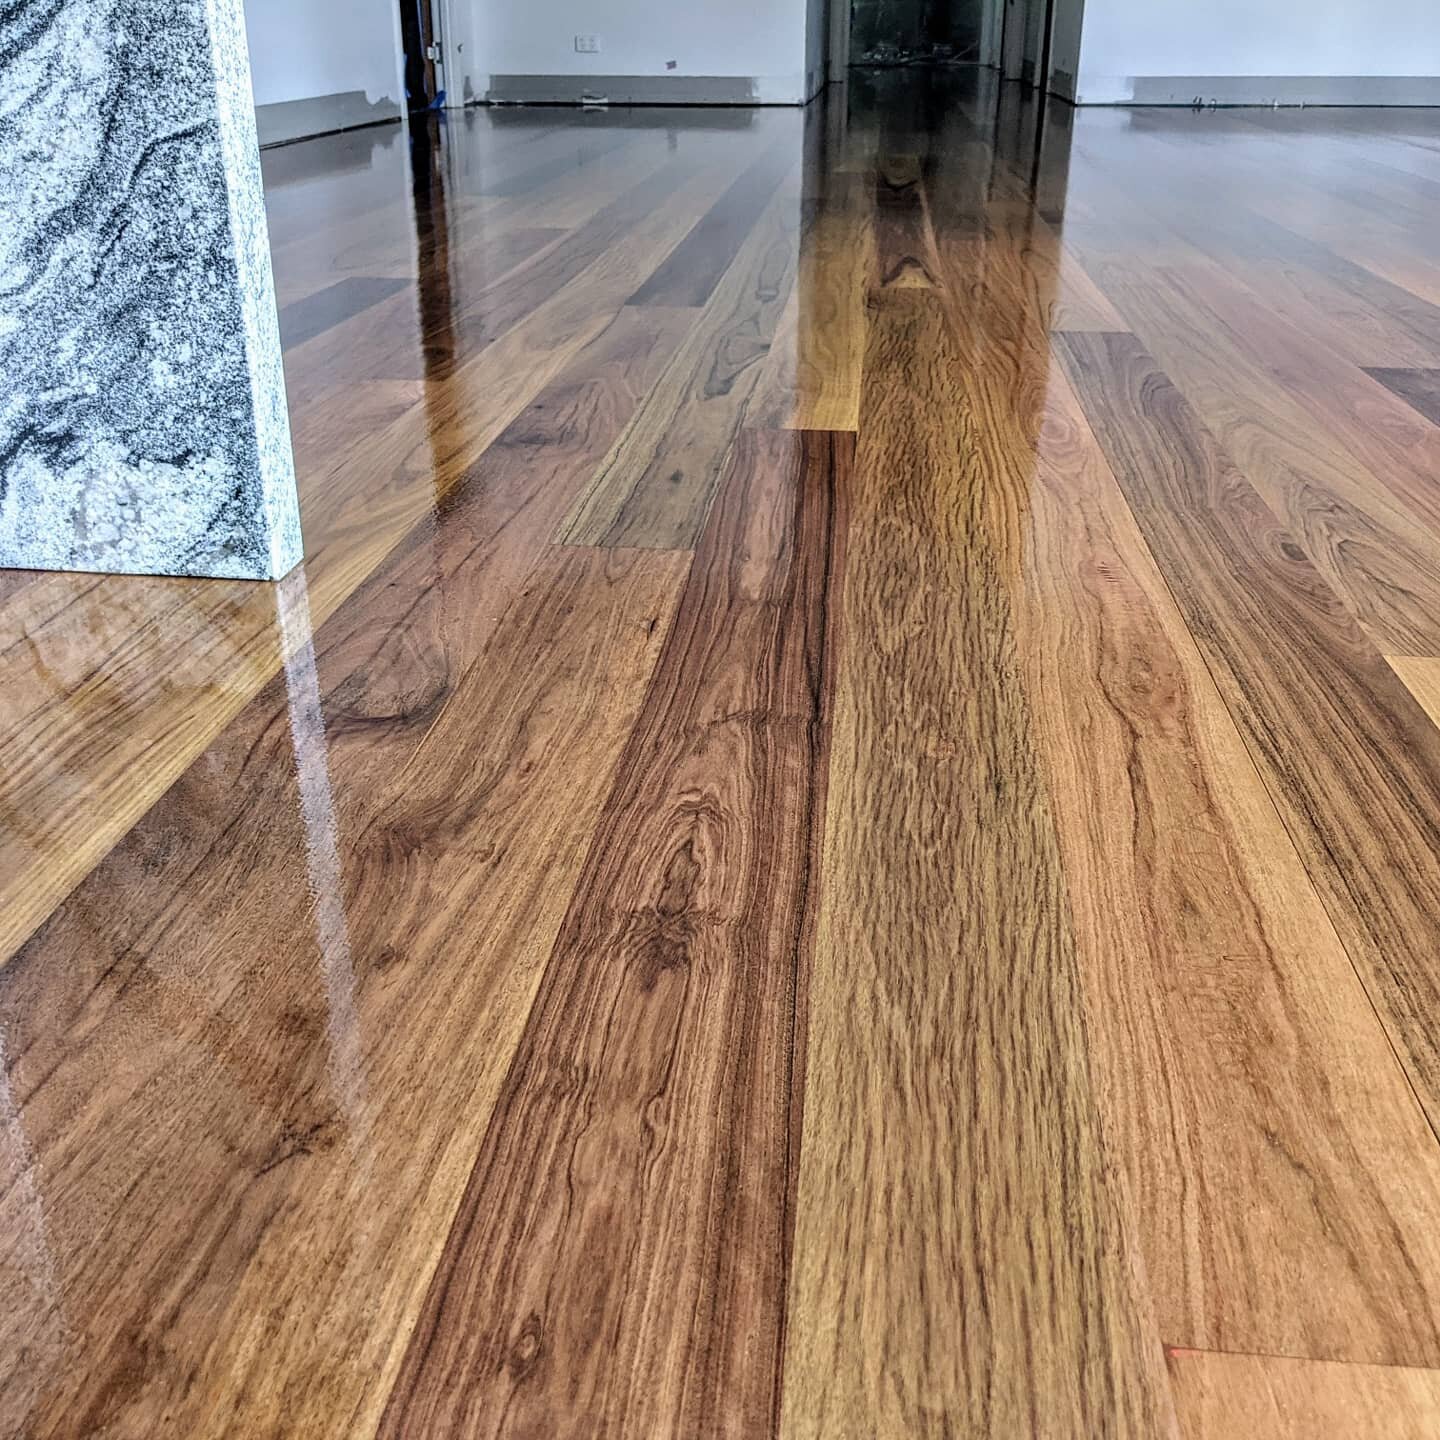 That's a wrap!! Final fine sand and the Fiddes Hardwax Oil coating is applied, this will dry to a beautiful Silk sheen. Grey Ironbark at its very best.
#timberoo_flooring_specialist #timberflooringsunshinecoast #timberflooringinstallers #floorsanding